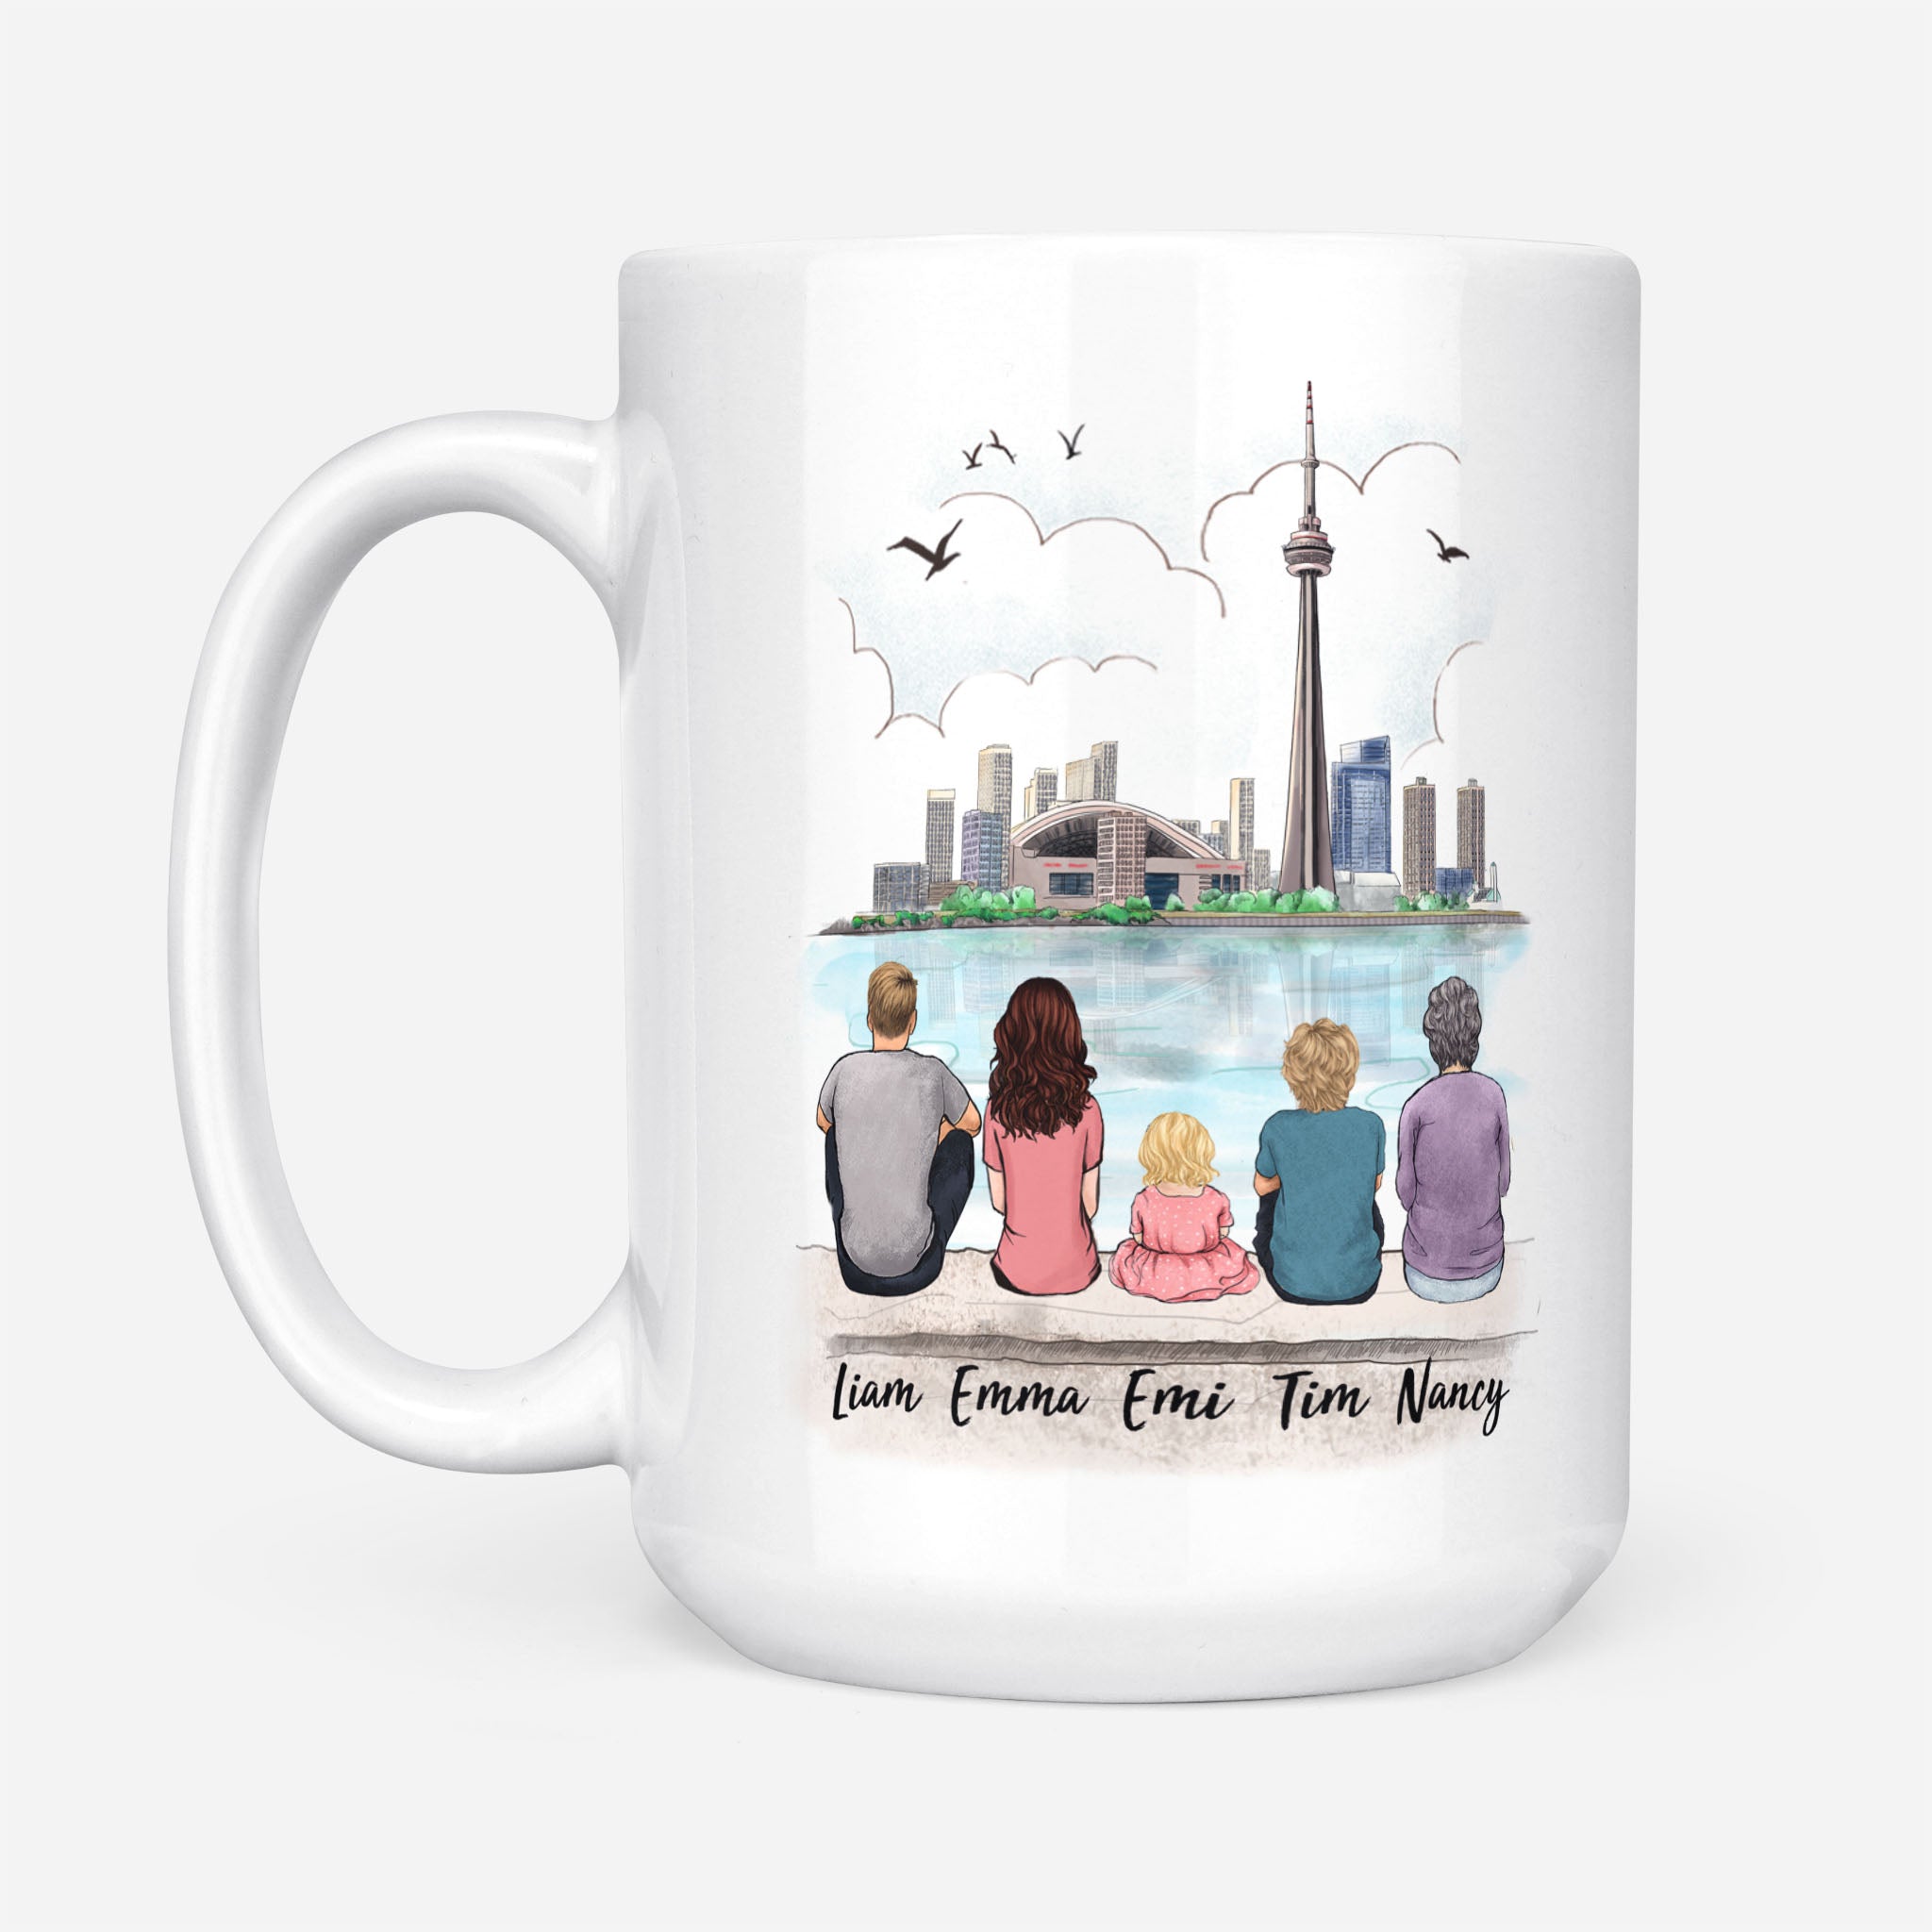 Personalized family members coffee mug gift for the whole